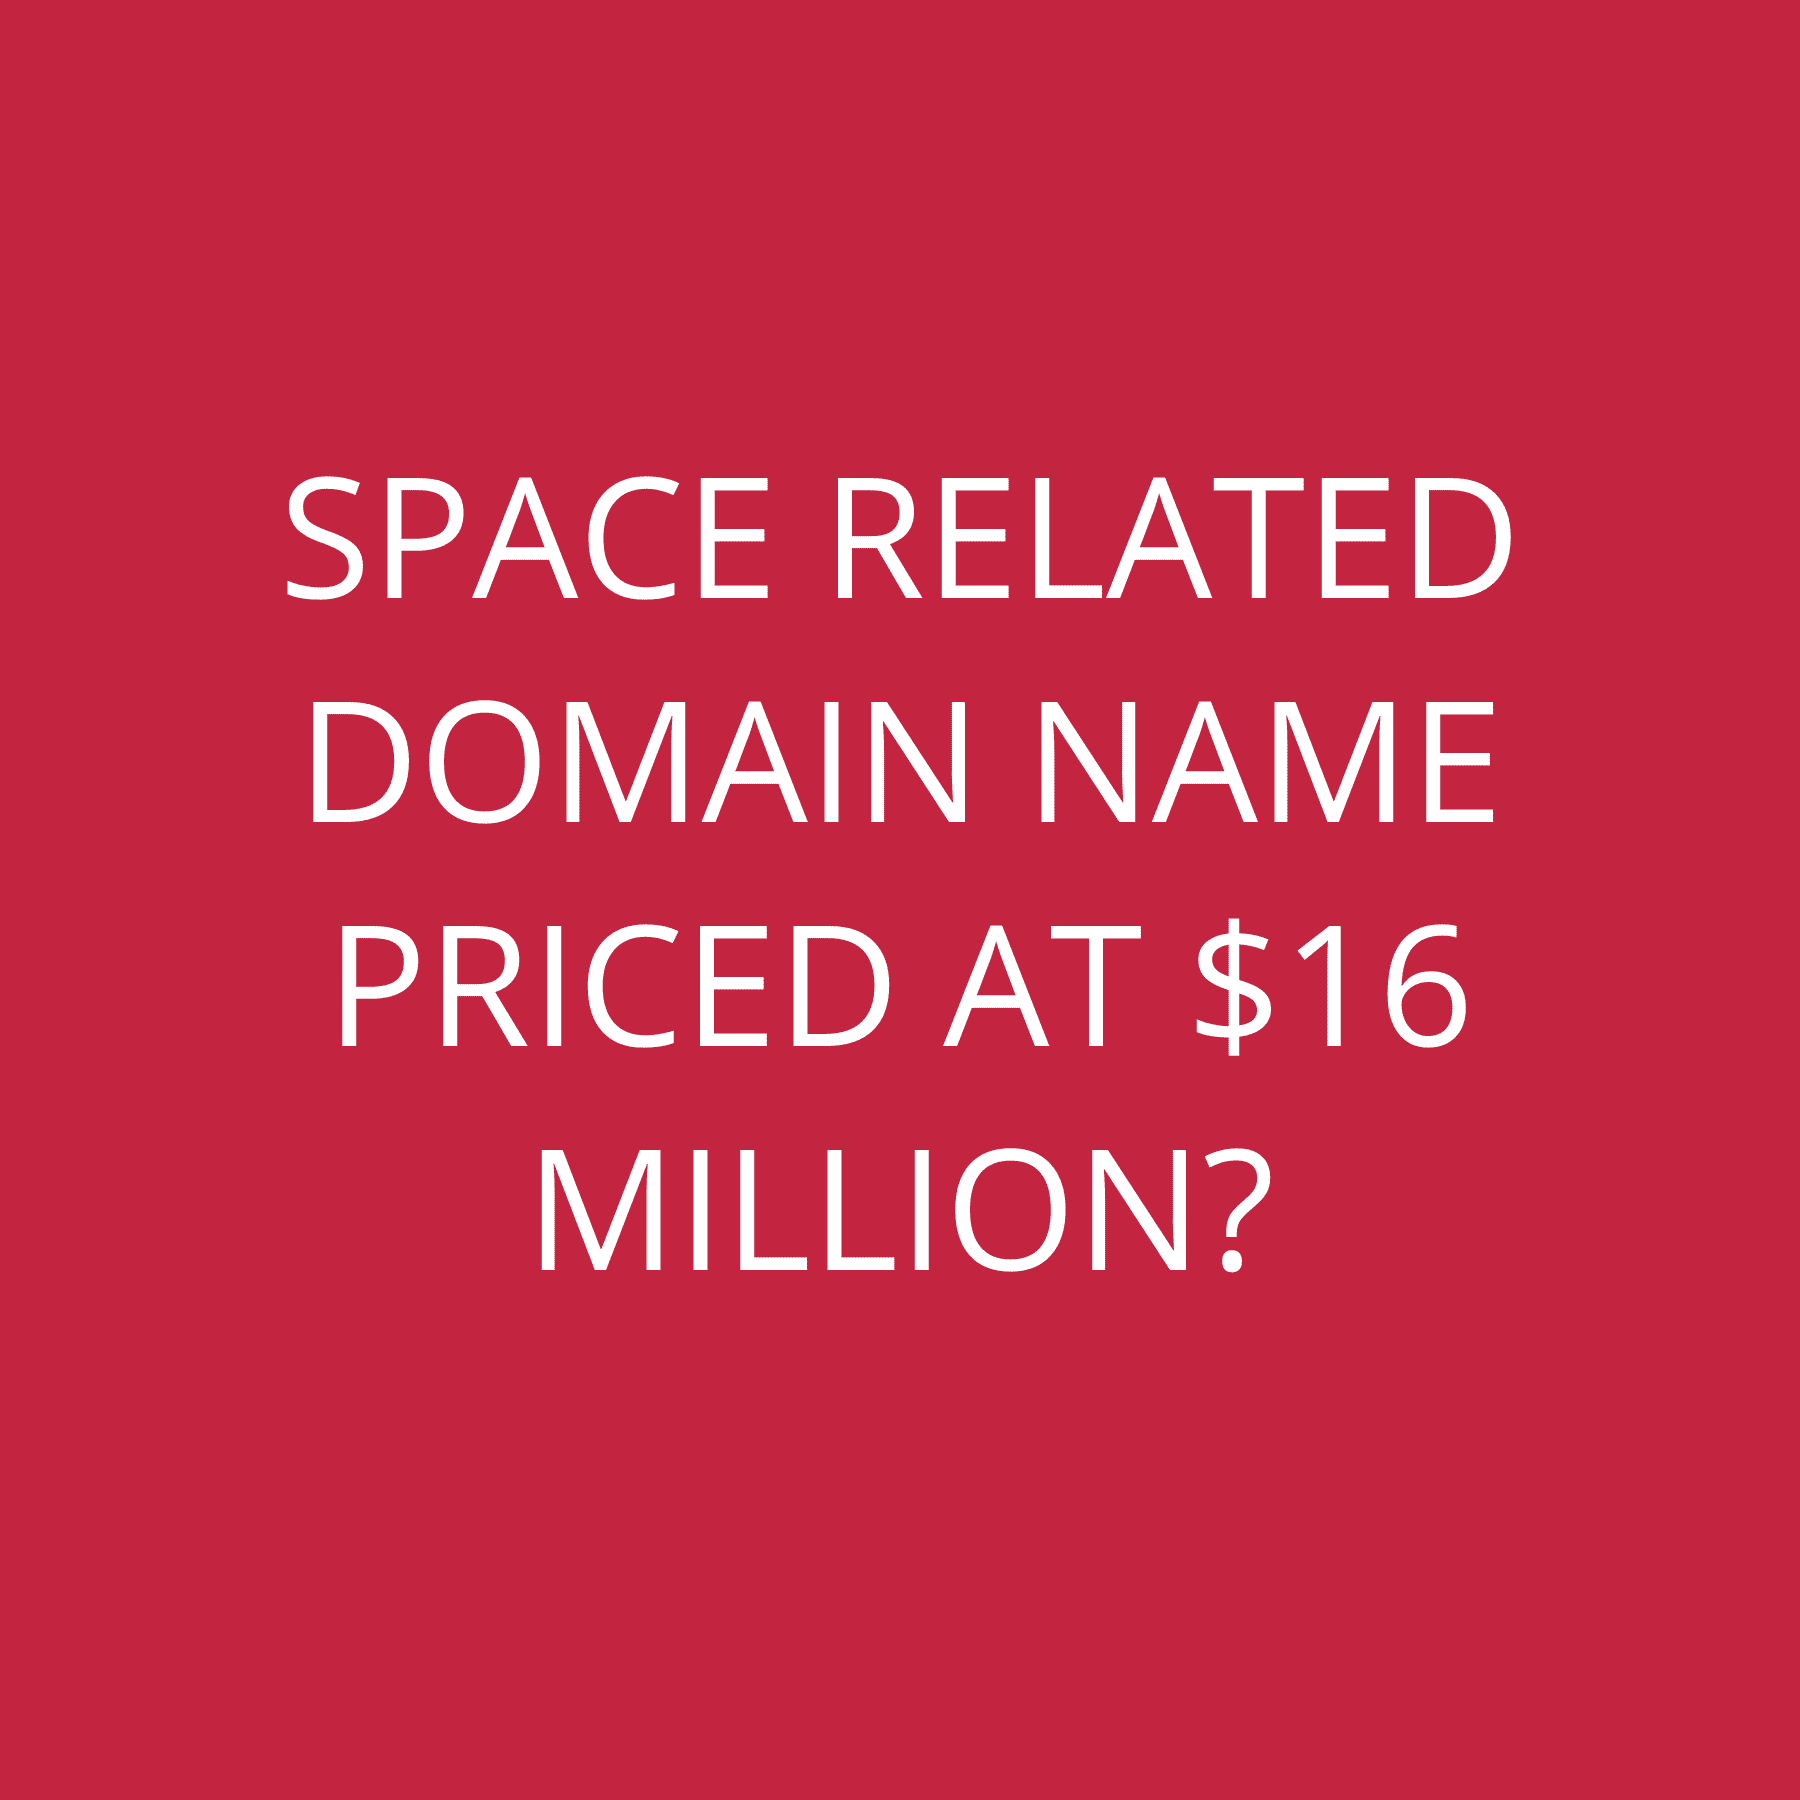 Space related domain name priced at $16 Million?